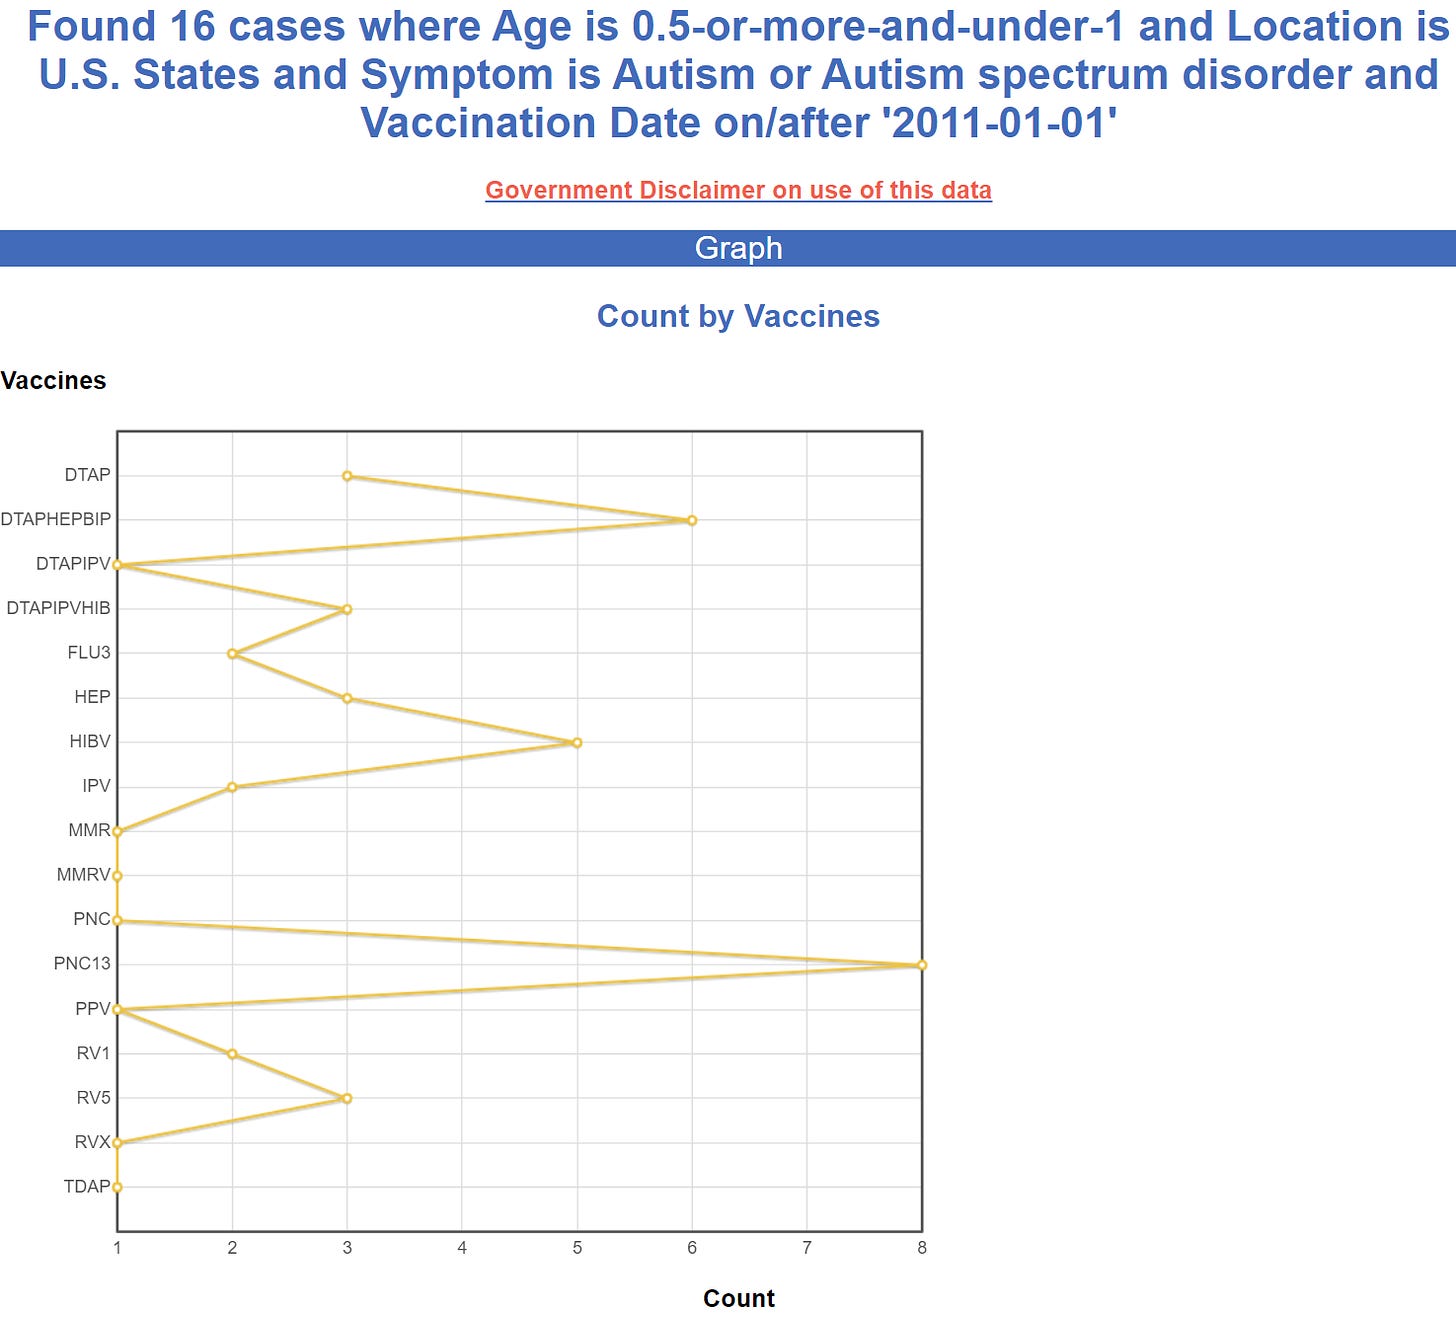 VAERS data shows that vaccines cause autism Https%3A%2F%2Fsubstack-post-media.s3.amazonaws.com%2Fpublic%2Fimages%2F70ac4685-e38e-4ef3-8c8b-5f10229576be_1475x1337